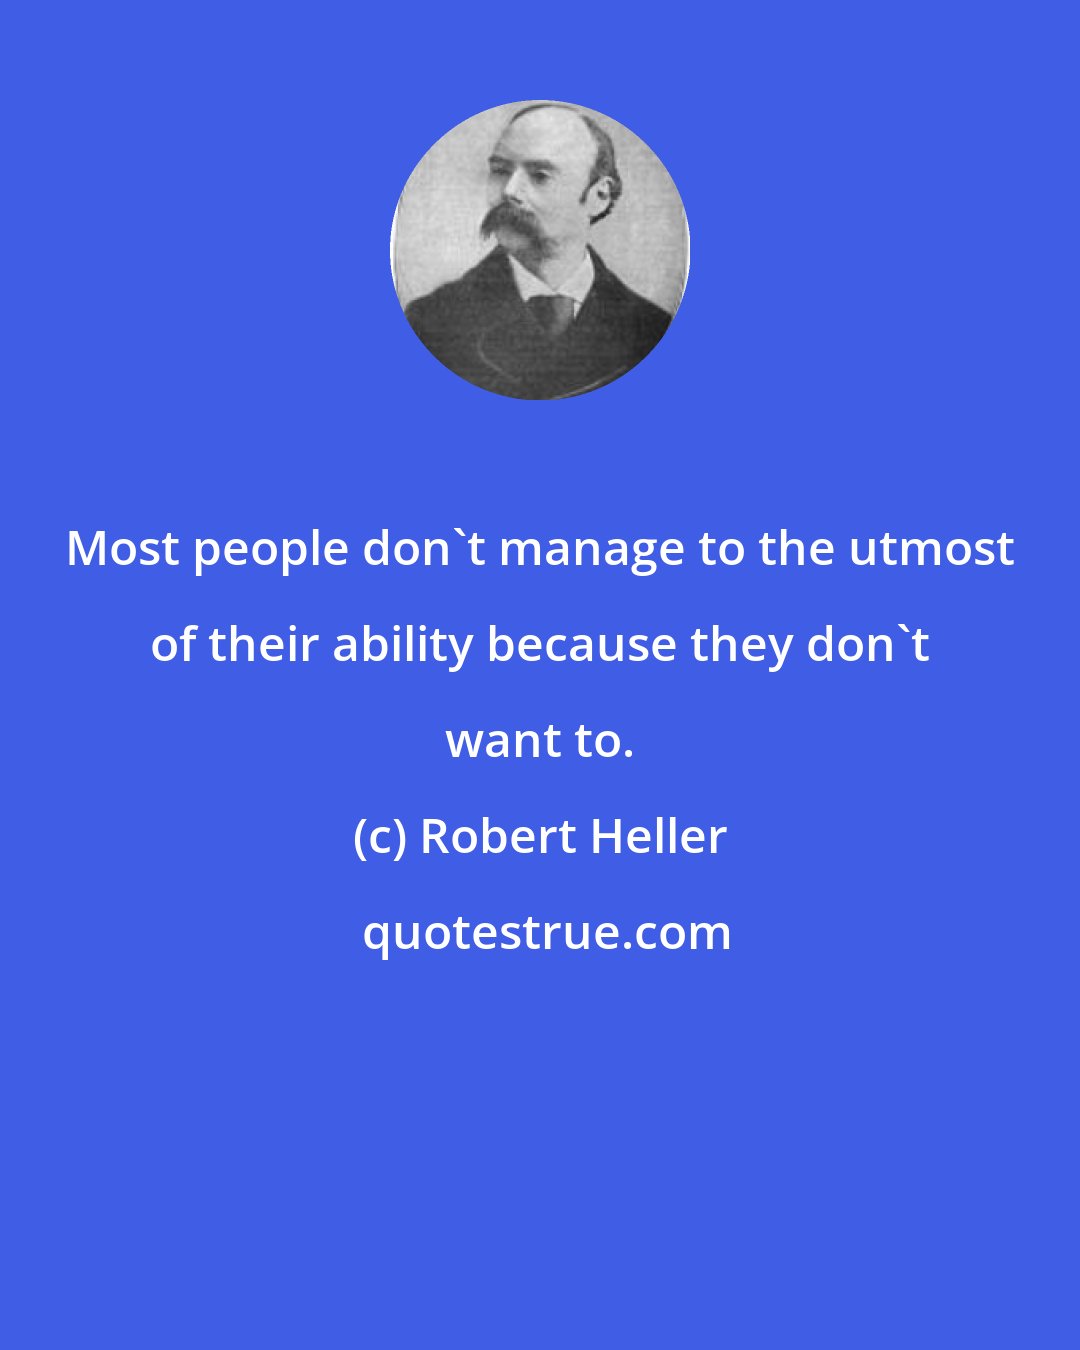 Robert Heller: Most people don't manage to the utmost of their ability because they don't want to.